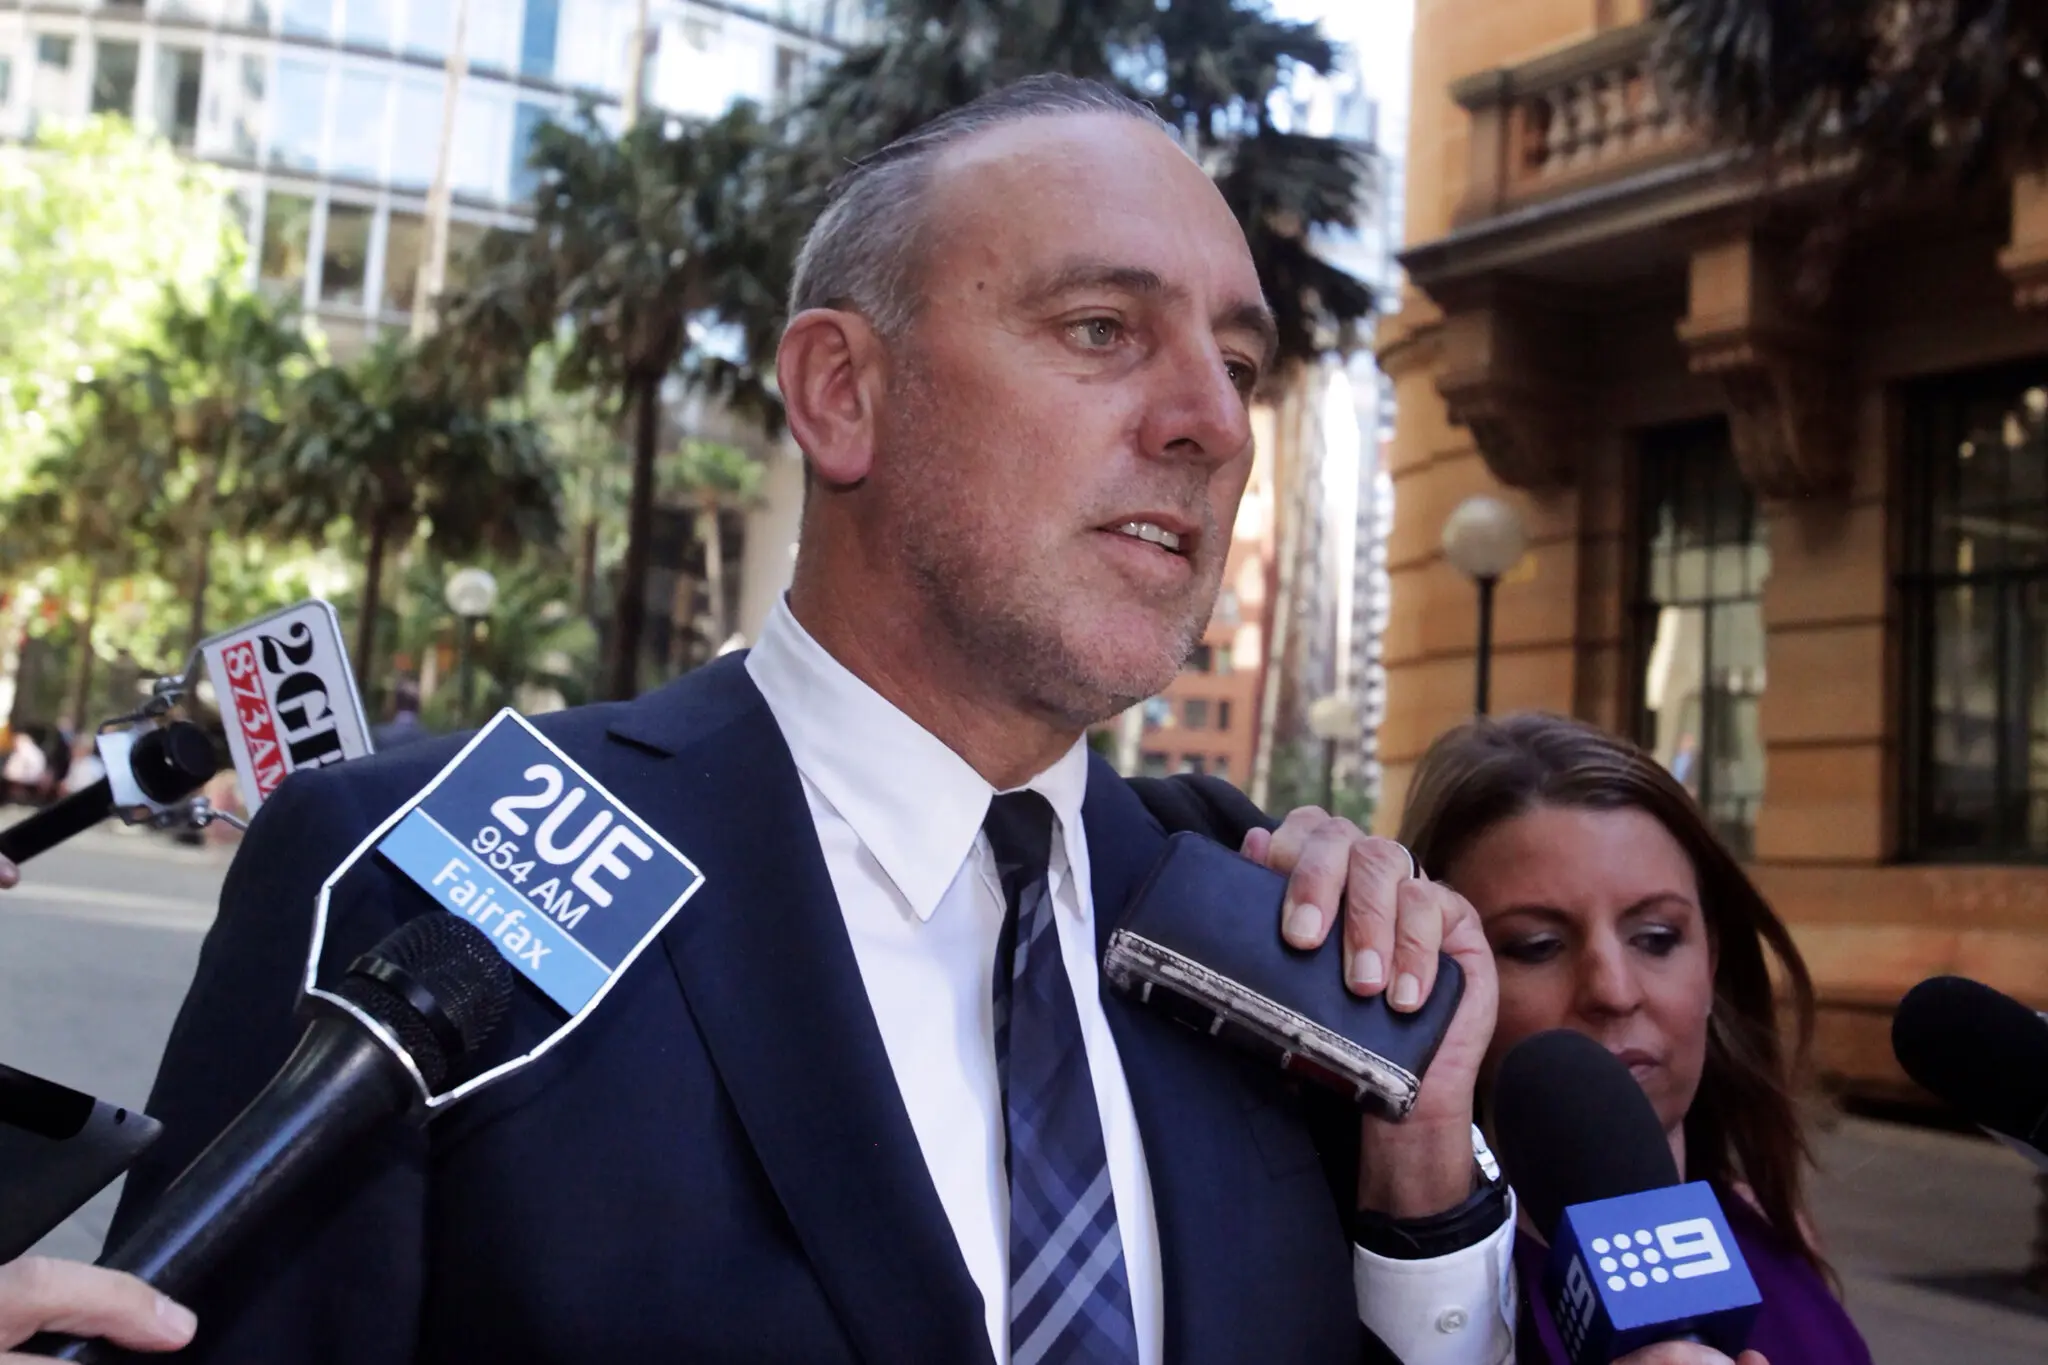 Brian Houston in Sydney, Australia, in 2014. He resigned after an internal investigation into allegations he had behaved inappropriately toward two women.Credit...Mick Tsikas/Australian Associated Press, via Associated Press